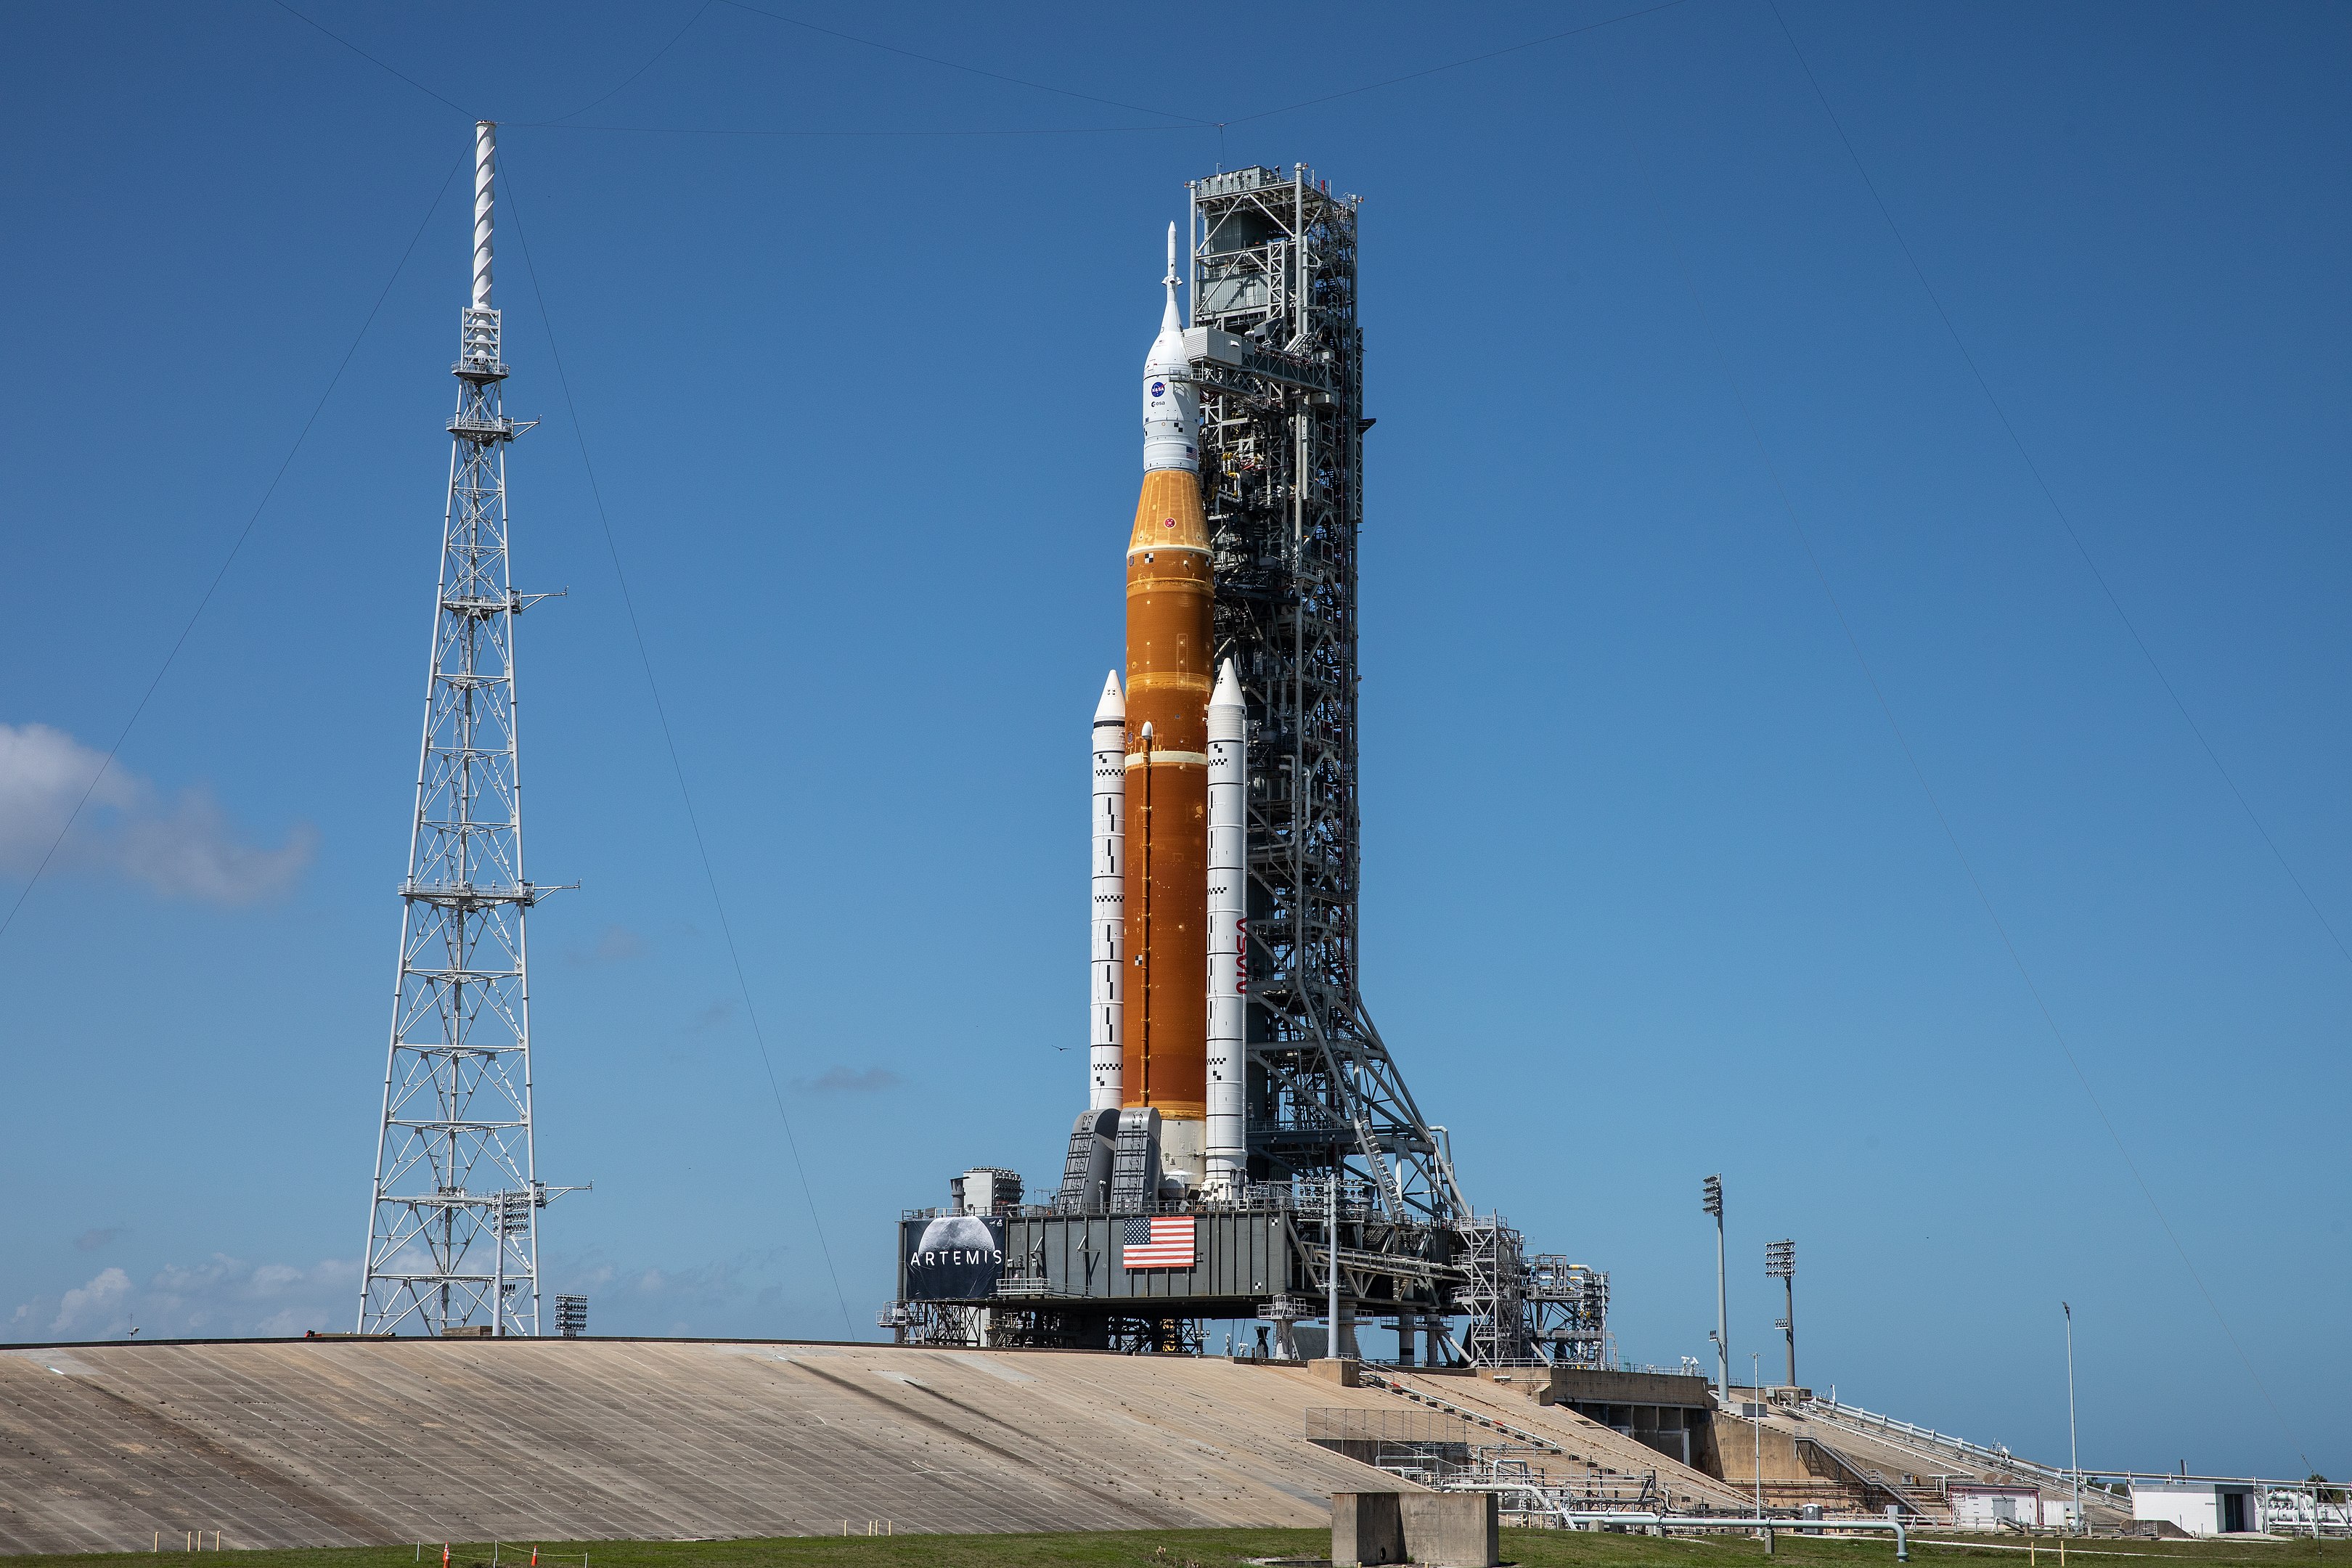 NASA's Space Launch System (SLS) rocket is photographed at Launch Pad 39B at the agency’s Kennedy Space Center in Florida on March 18, 2022.